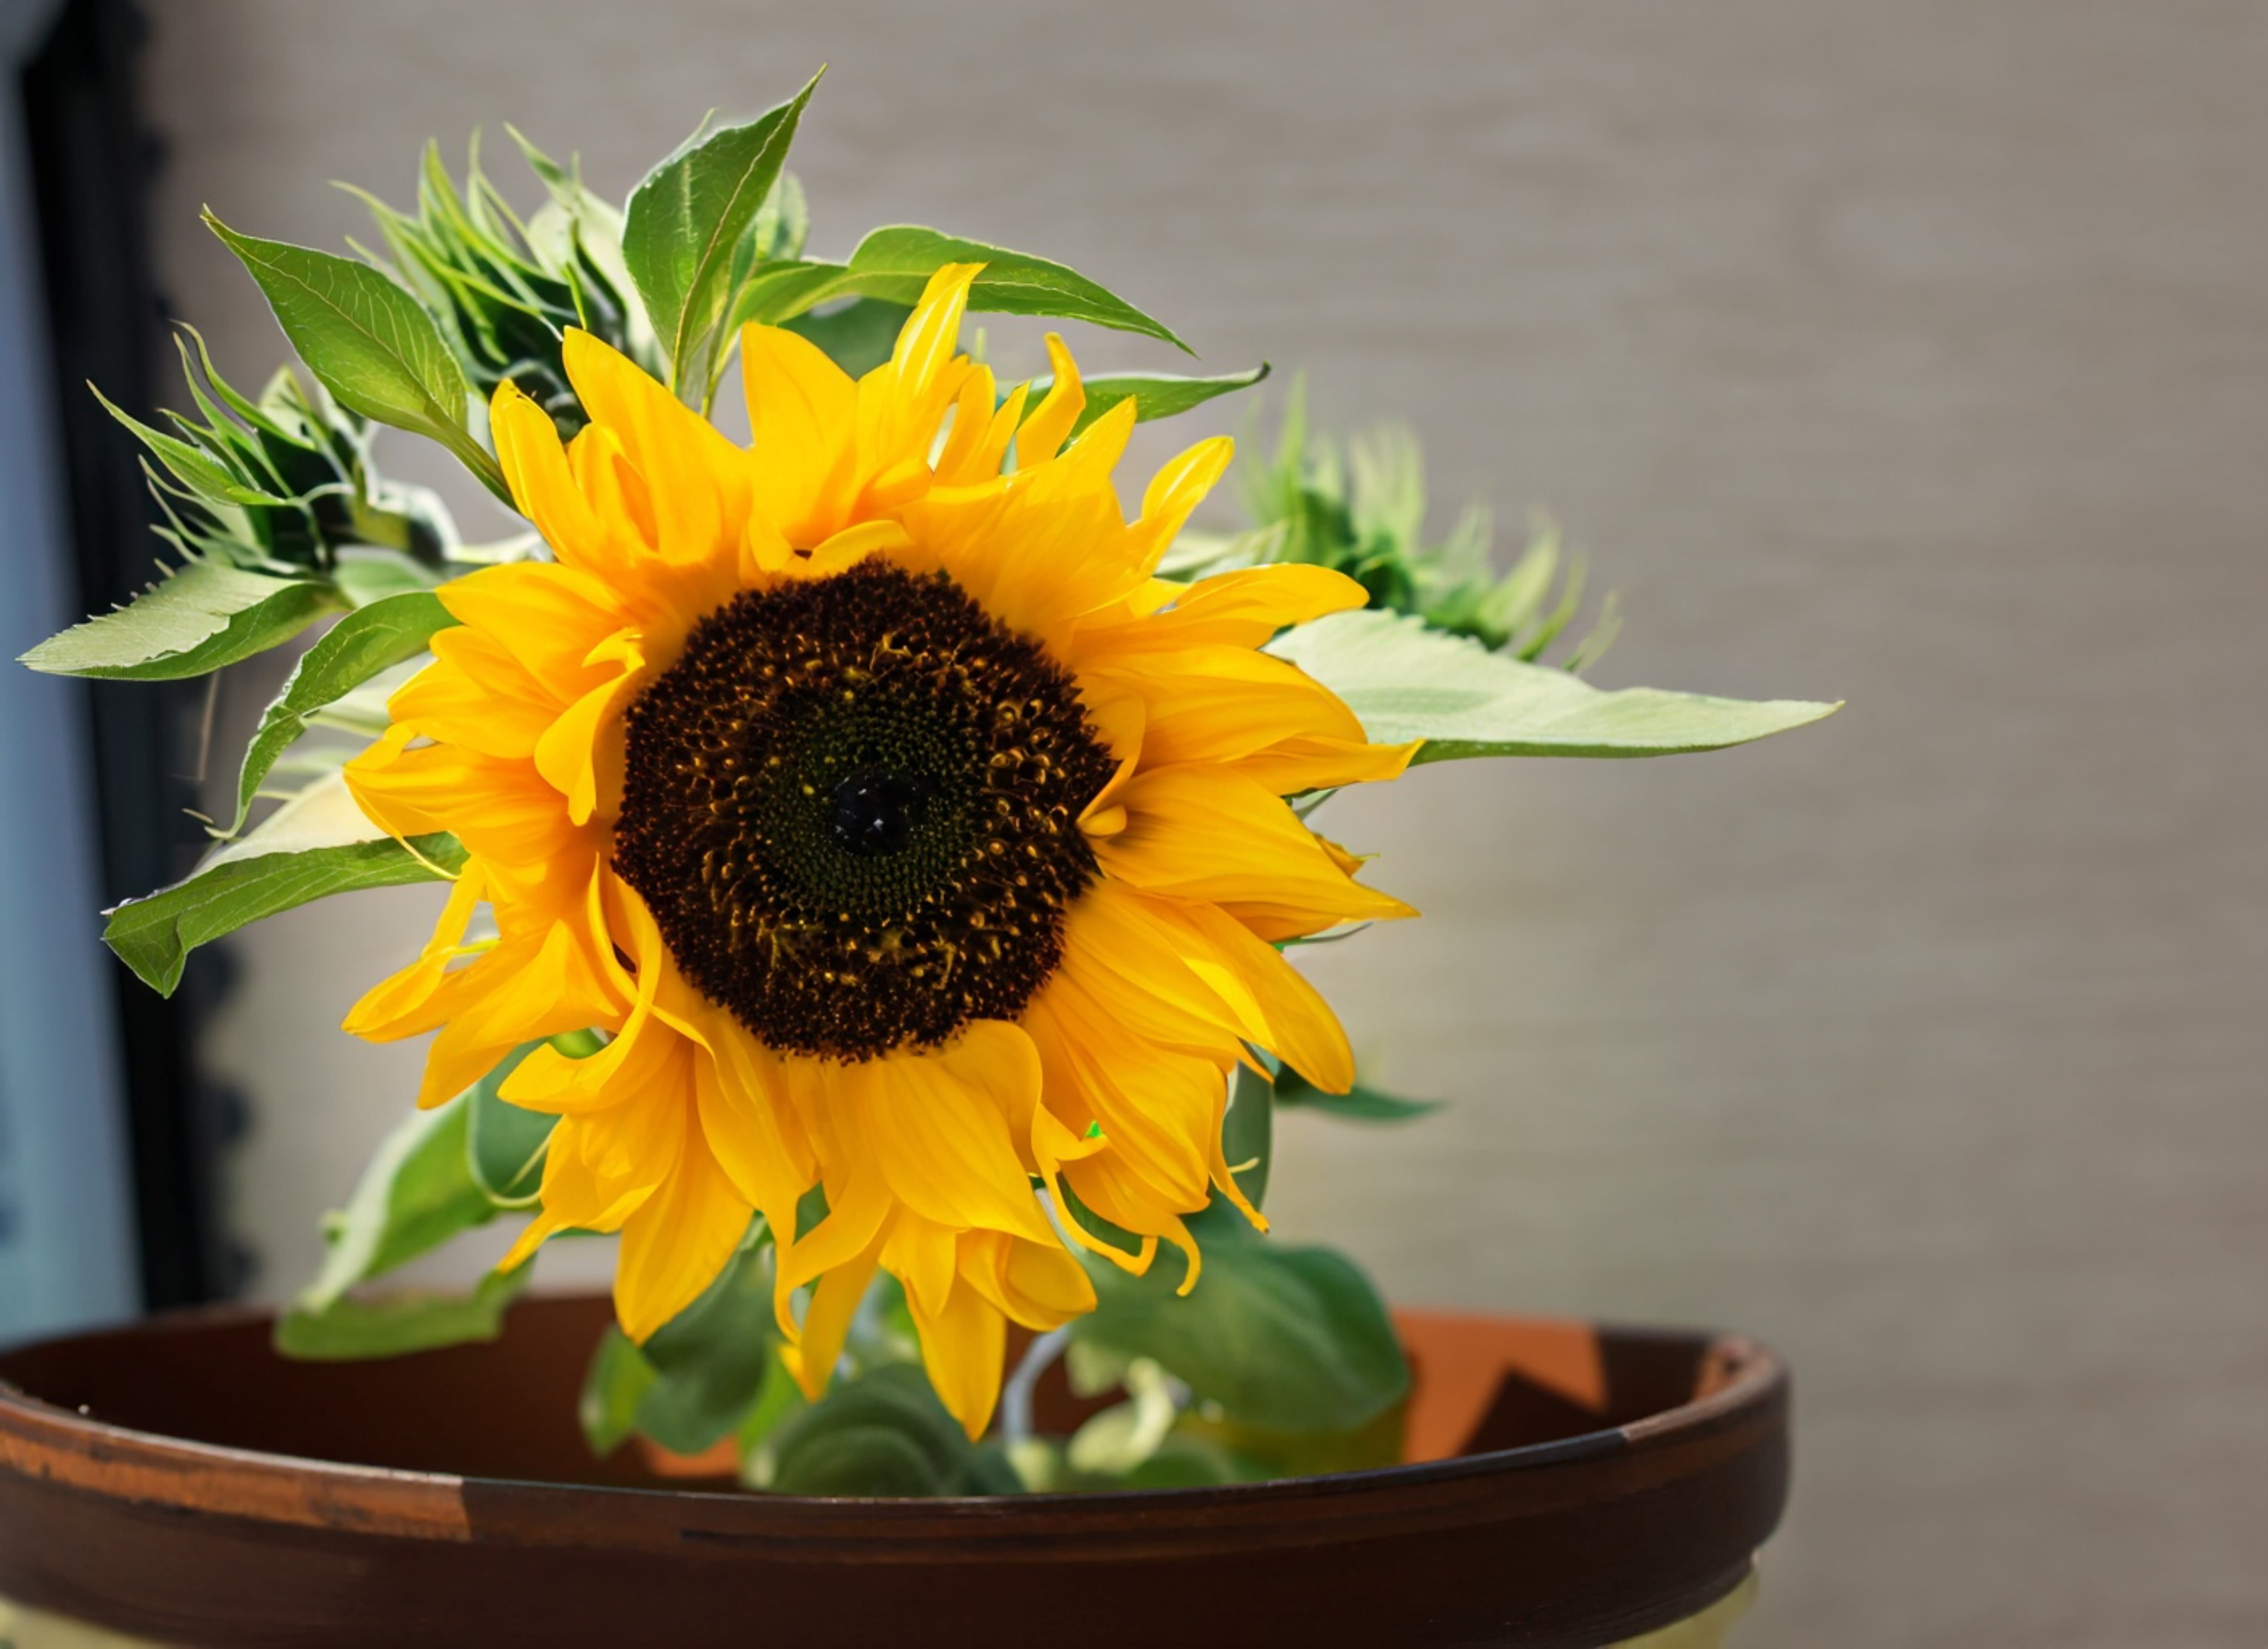 https://cdn.apartmenttherapy.info/image/upload/v1693409189/at/home-projects/2023-08/growing-sunflowers-in-pots/close-up-potted-sunflower-shutterstock_2322131063.jpg